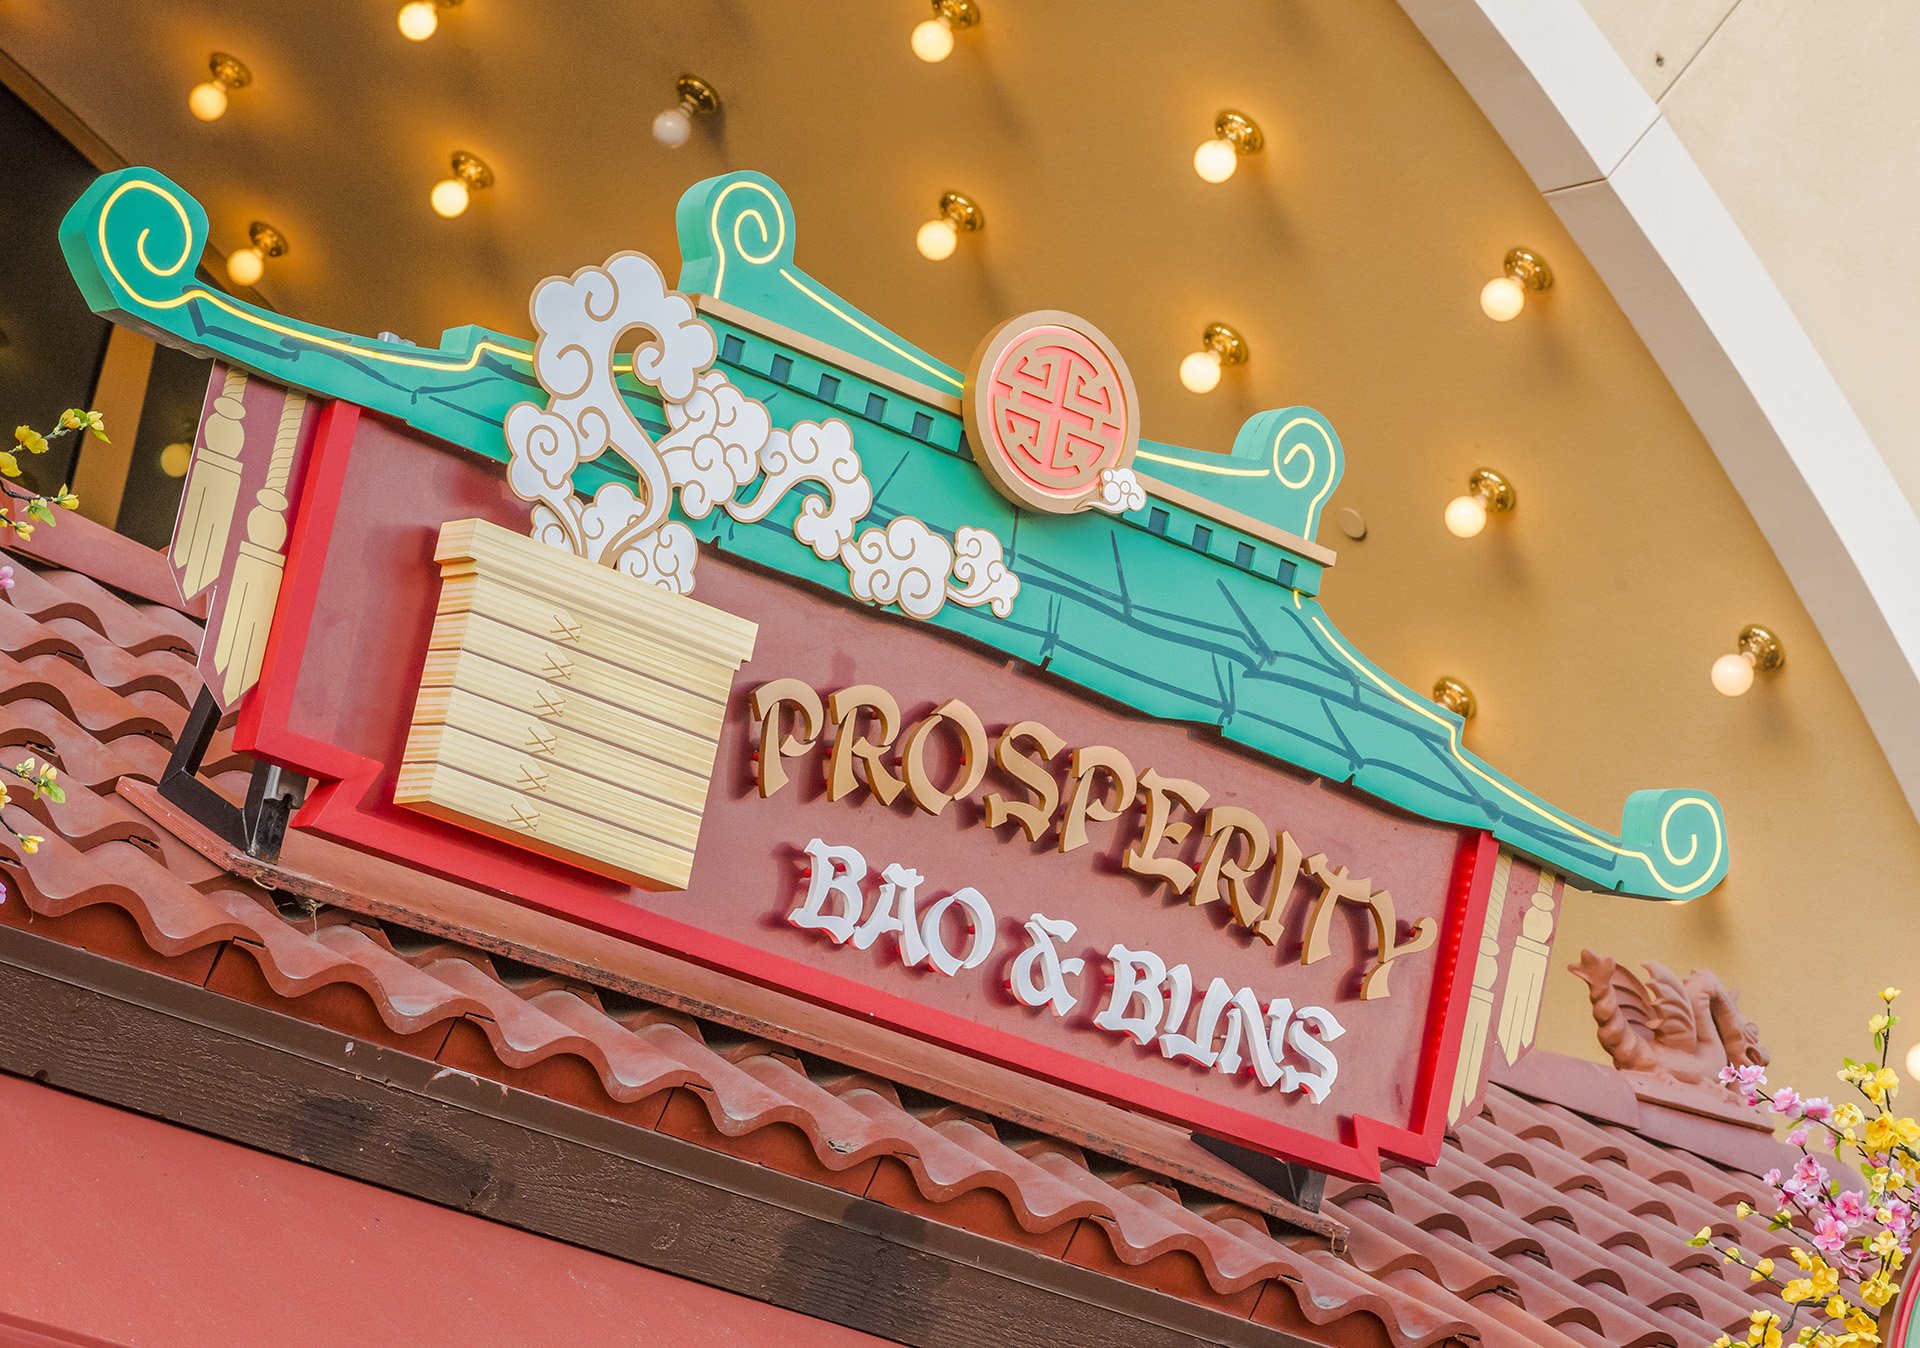  Prosperity Bao &amp; Buns is in front of the center of the Little Mermaid ride building. 